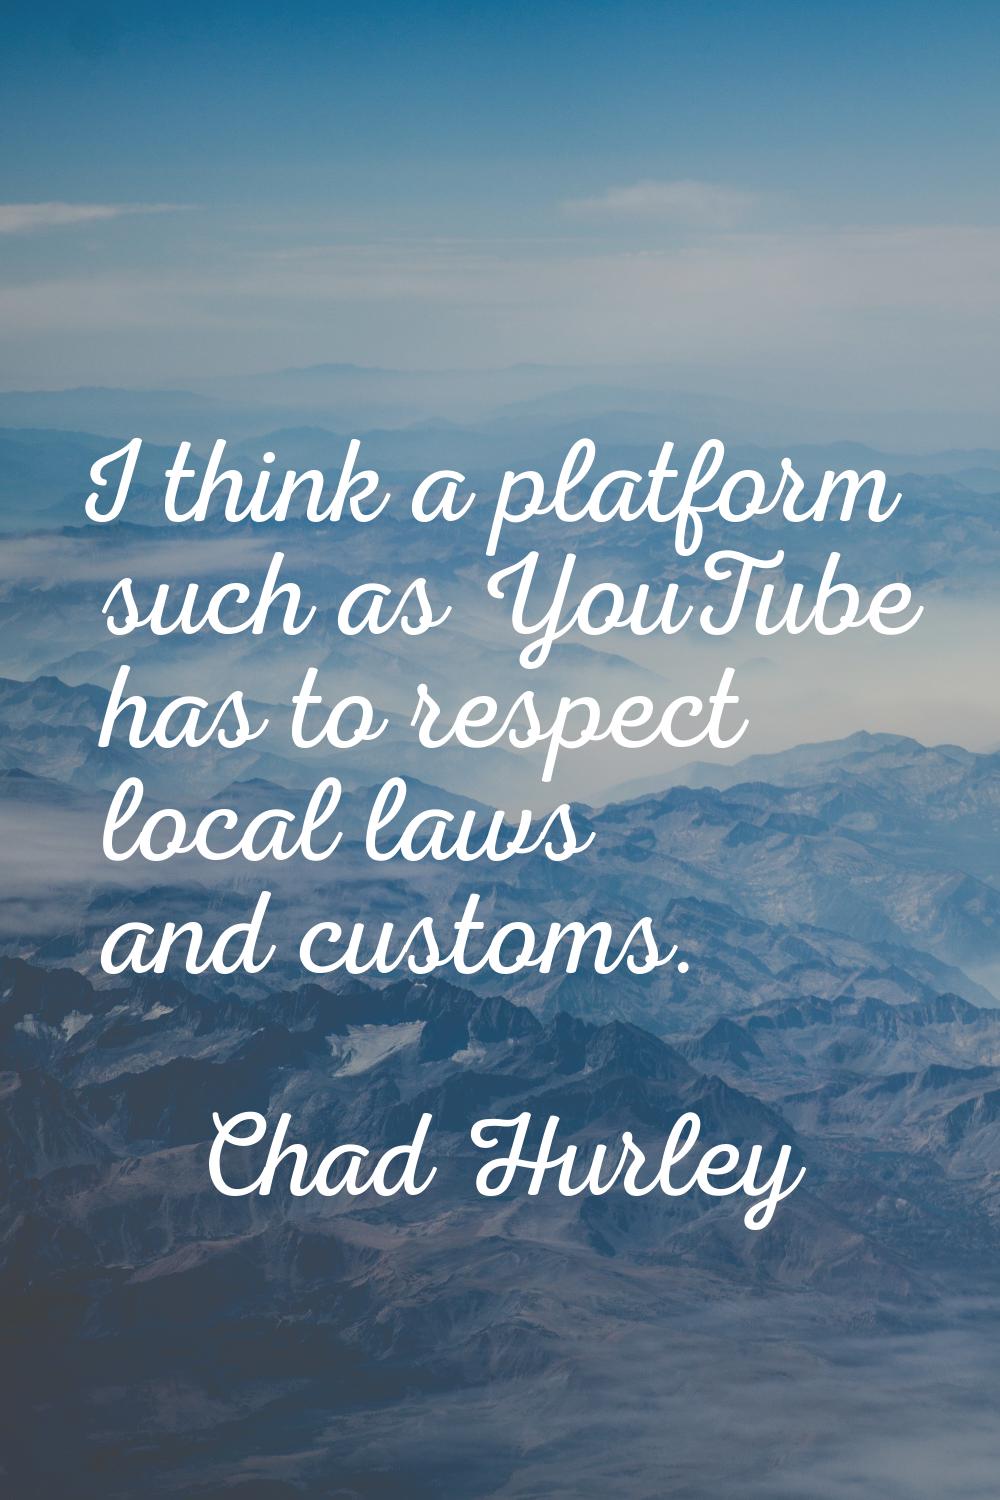 I think a platform such as YouTube has to respect local laws and customs.